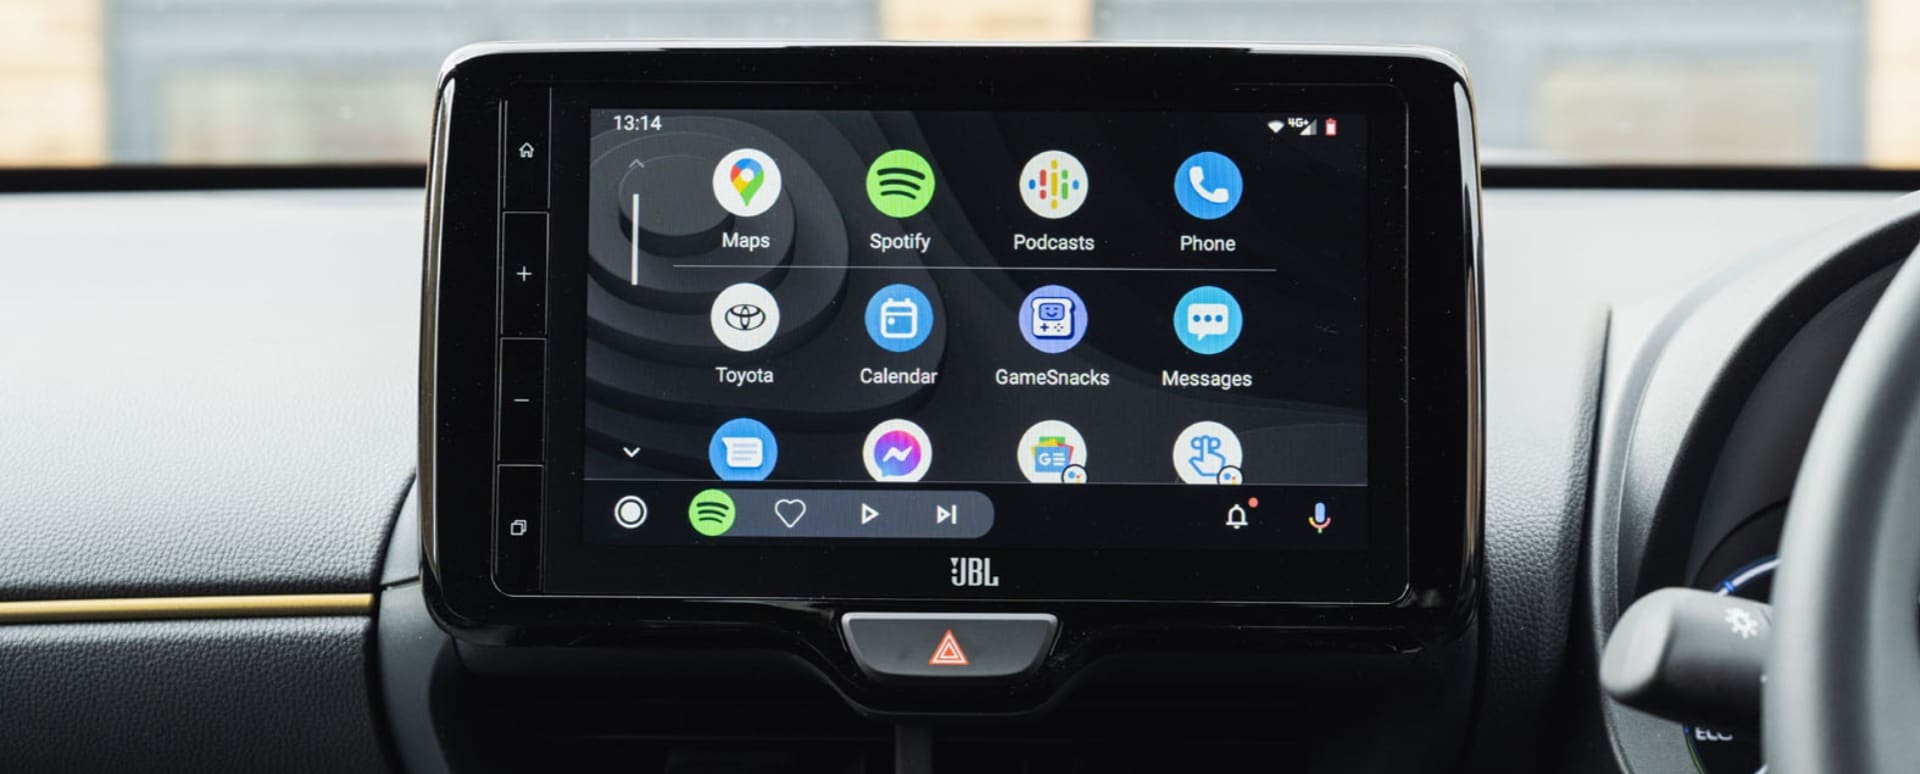 It is possible that the new interface looks like Android auto